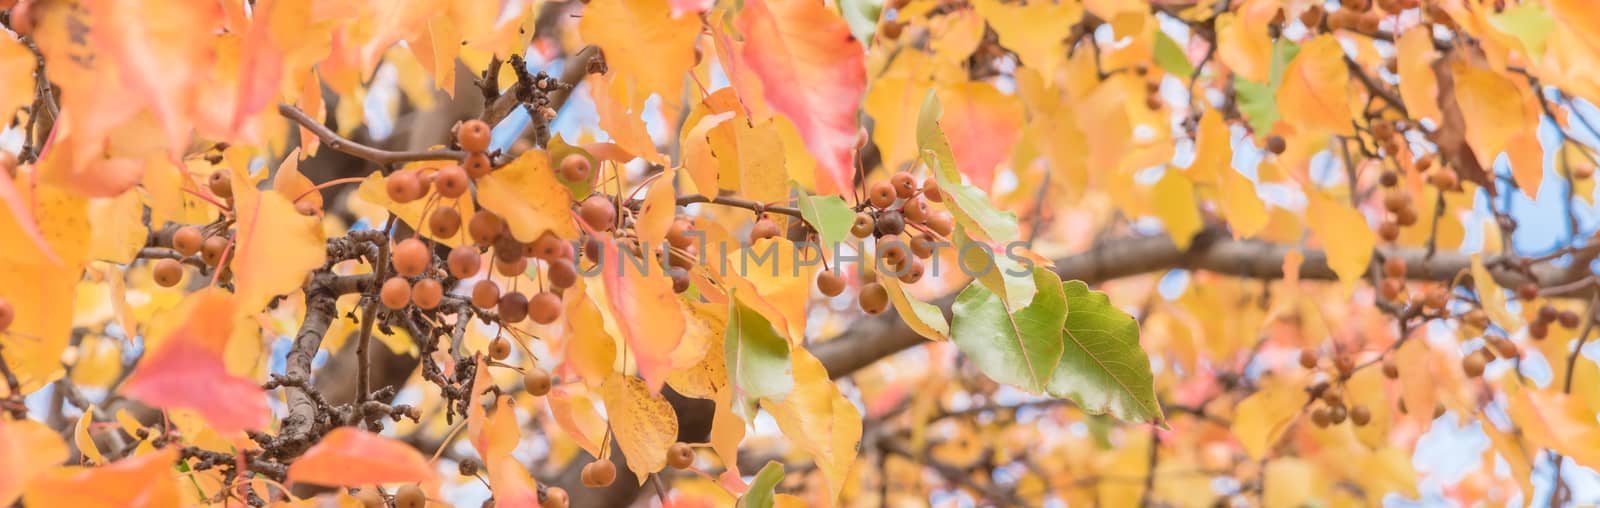 Panoramic green, orange, yellow, red fall leaves color of Bradford pear or Pyrus calleryana tree by trongnguyen